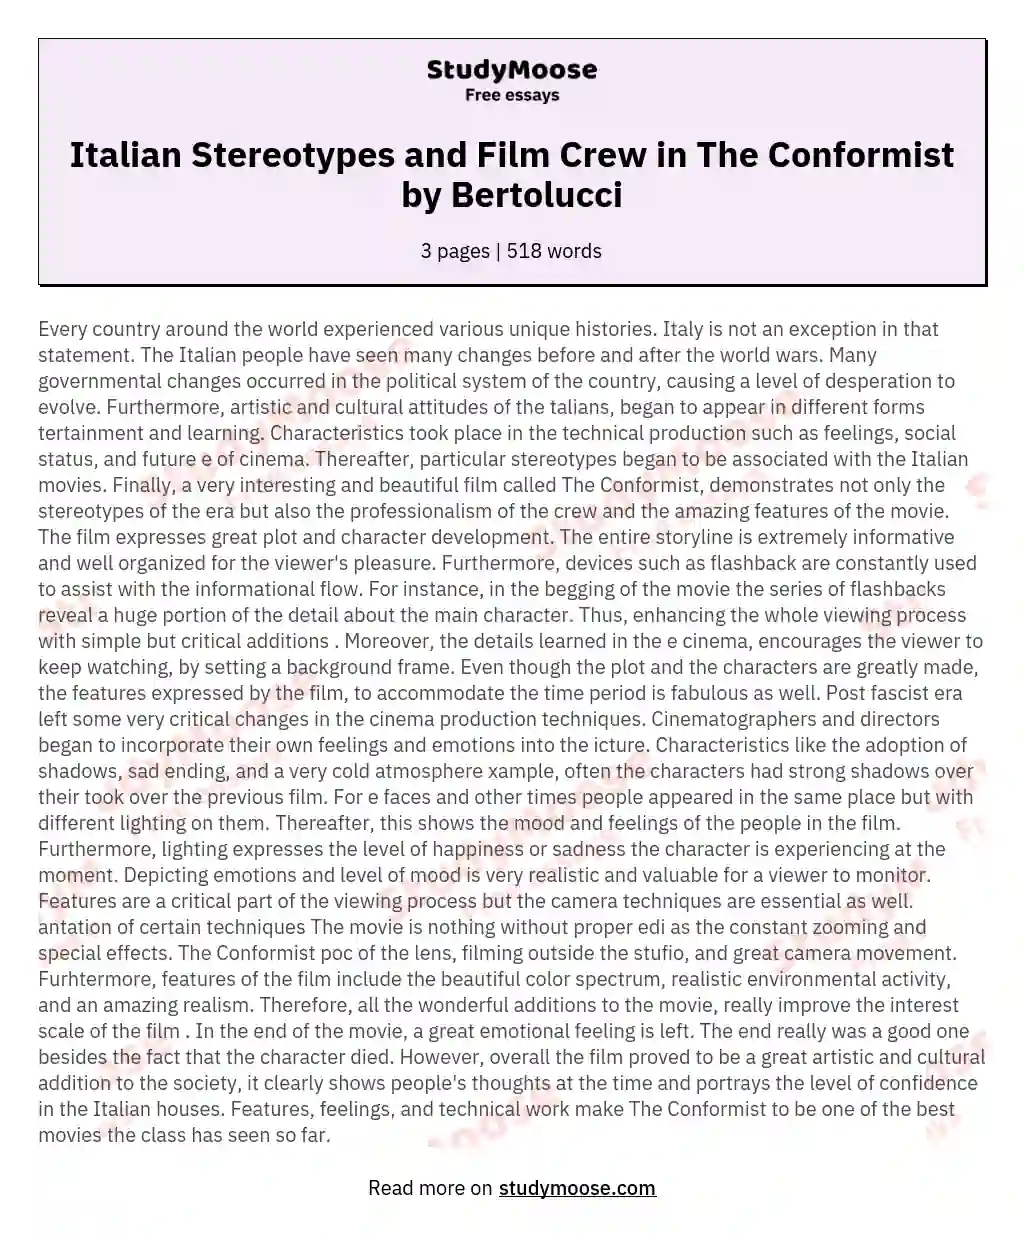 Italian Stereotypes and Film Crew in The Conformist by Bertolucci essay